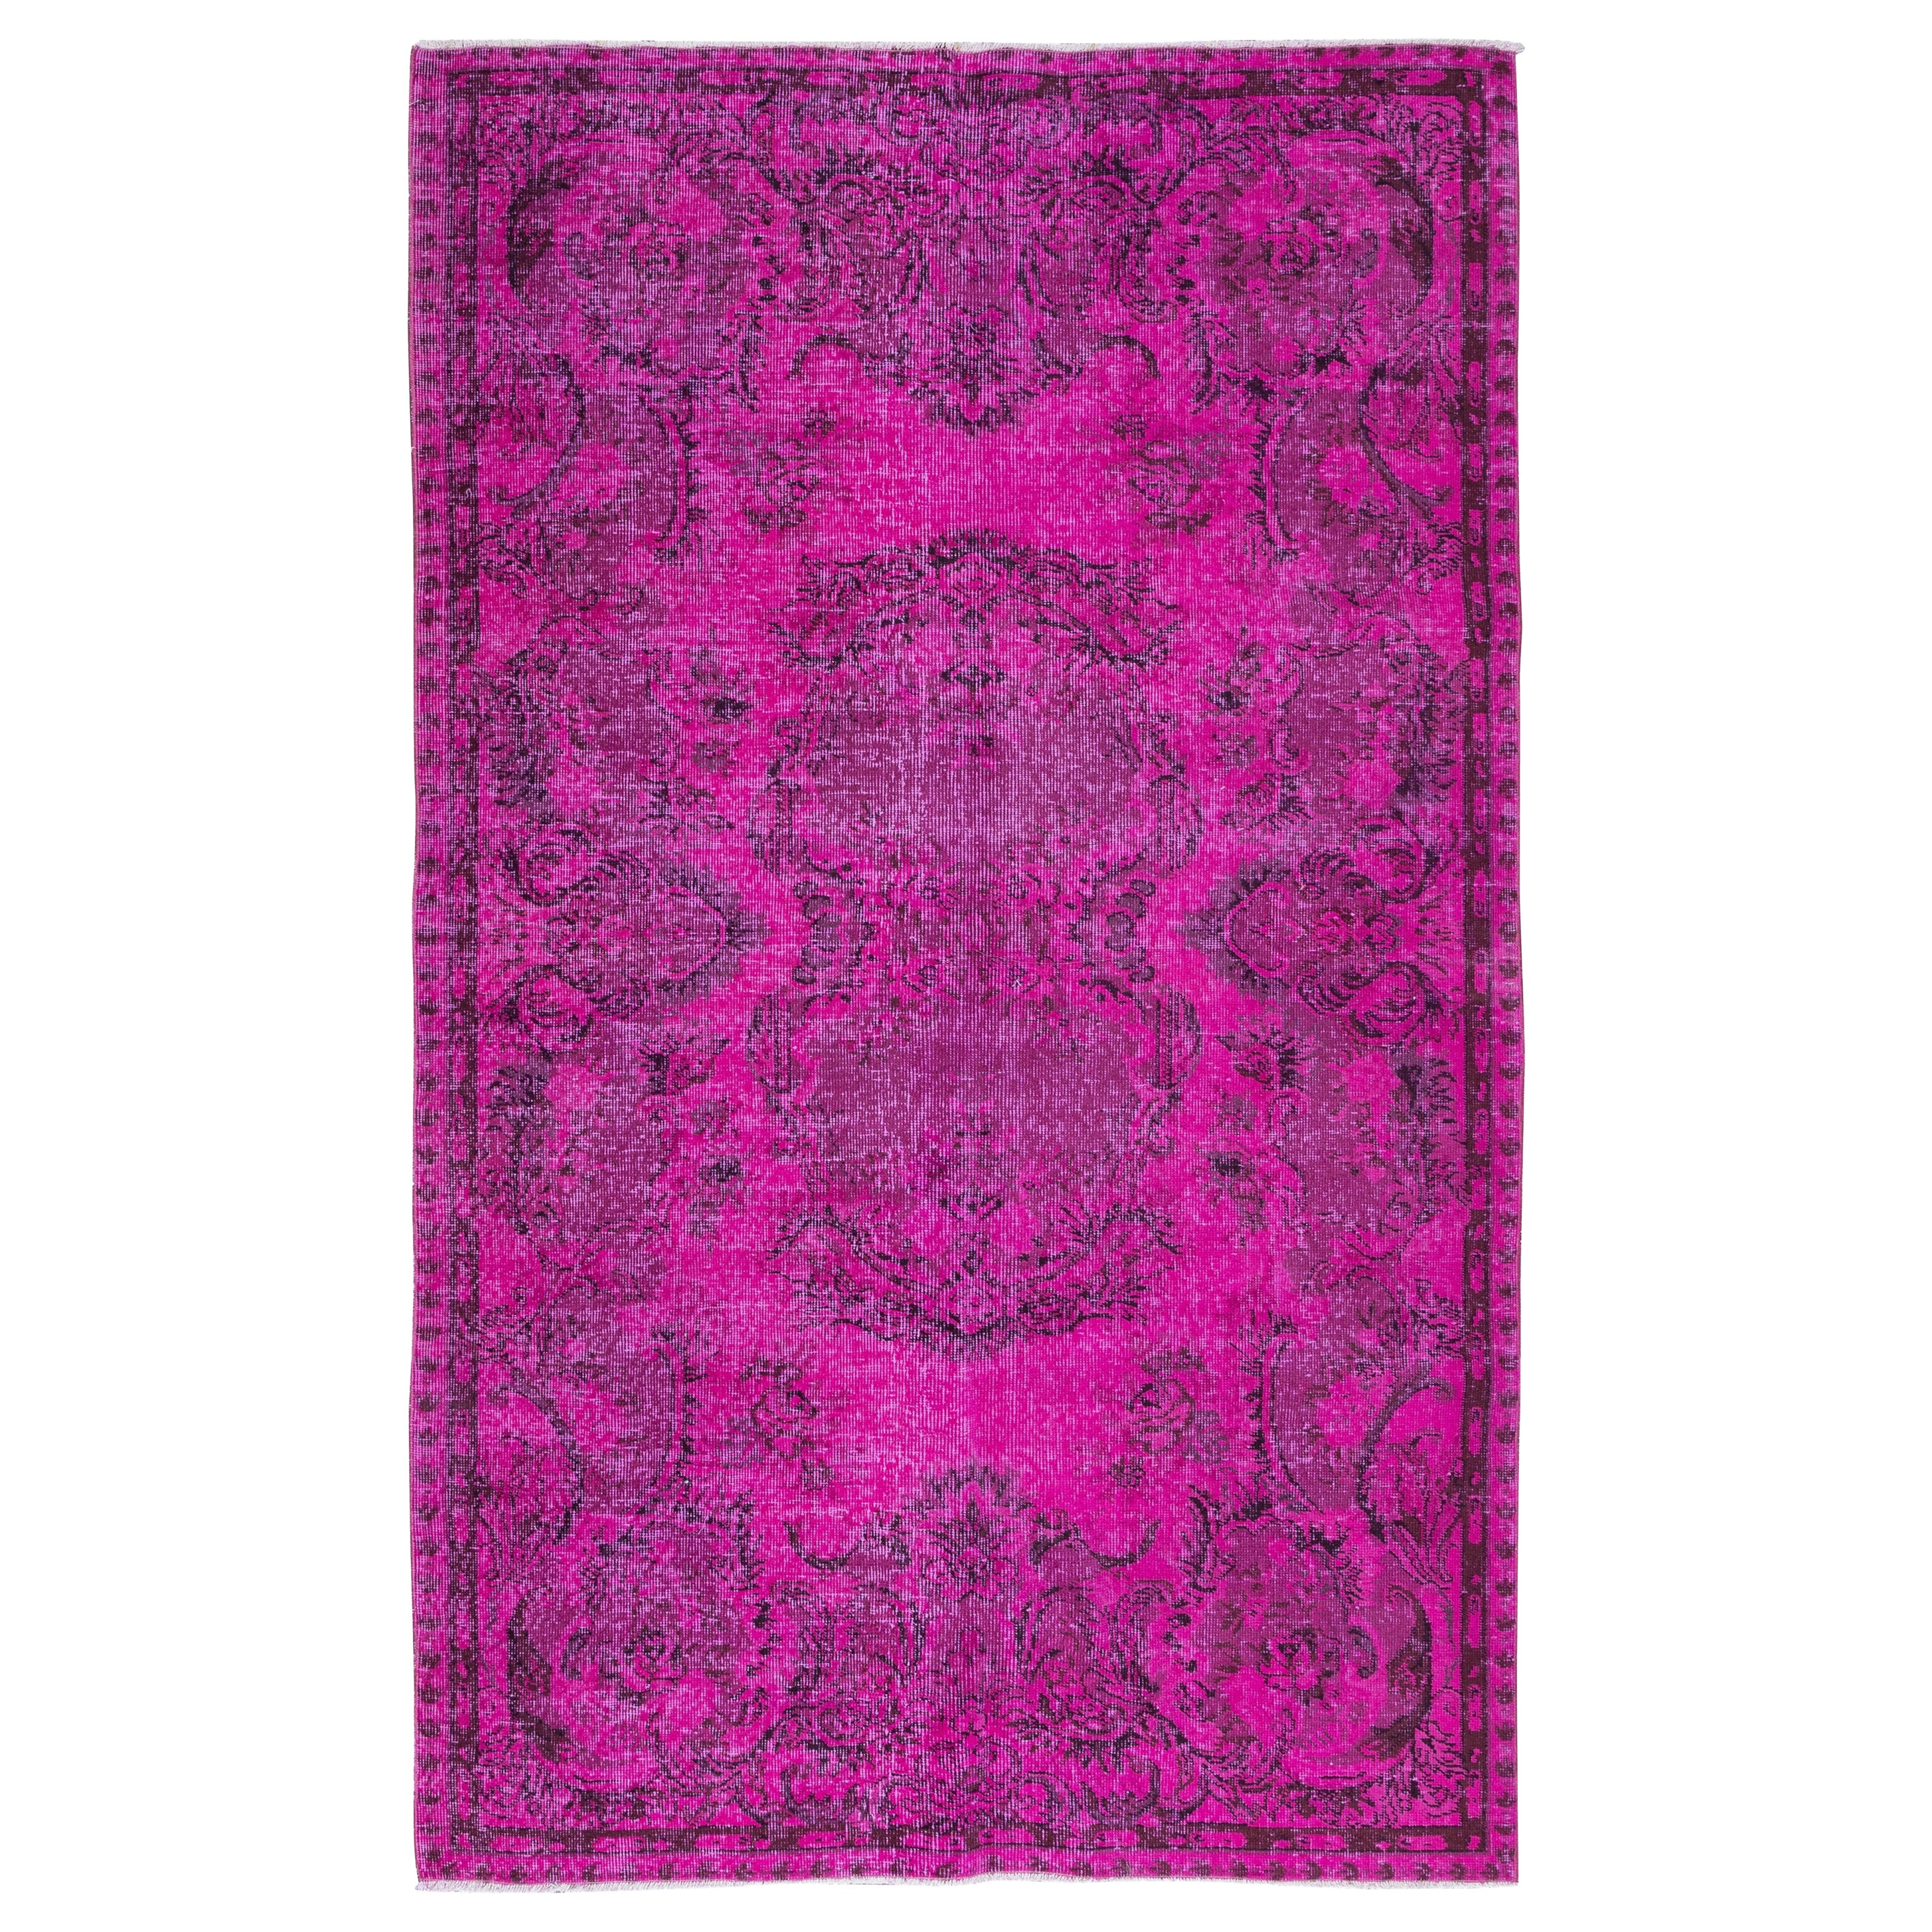 5.2x8.3 Ft Pink Aubusson Inspired Rug for Modern Interiors, Handmade in Turkey For Sale